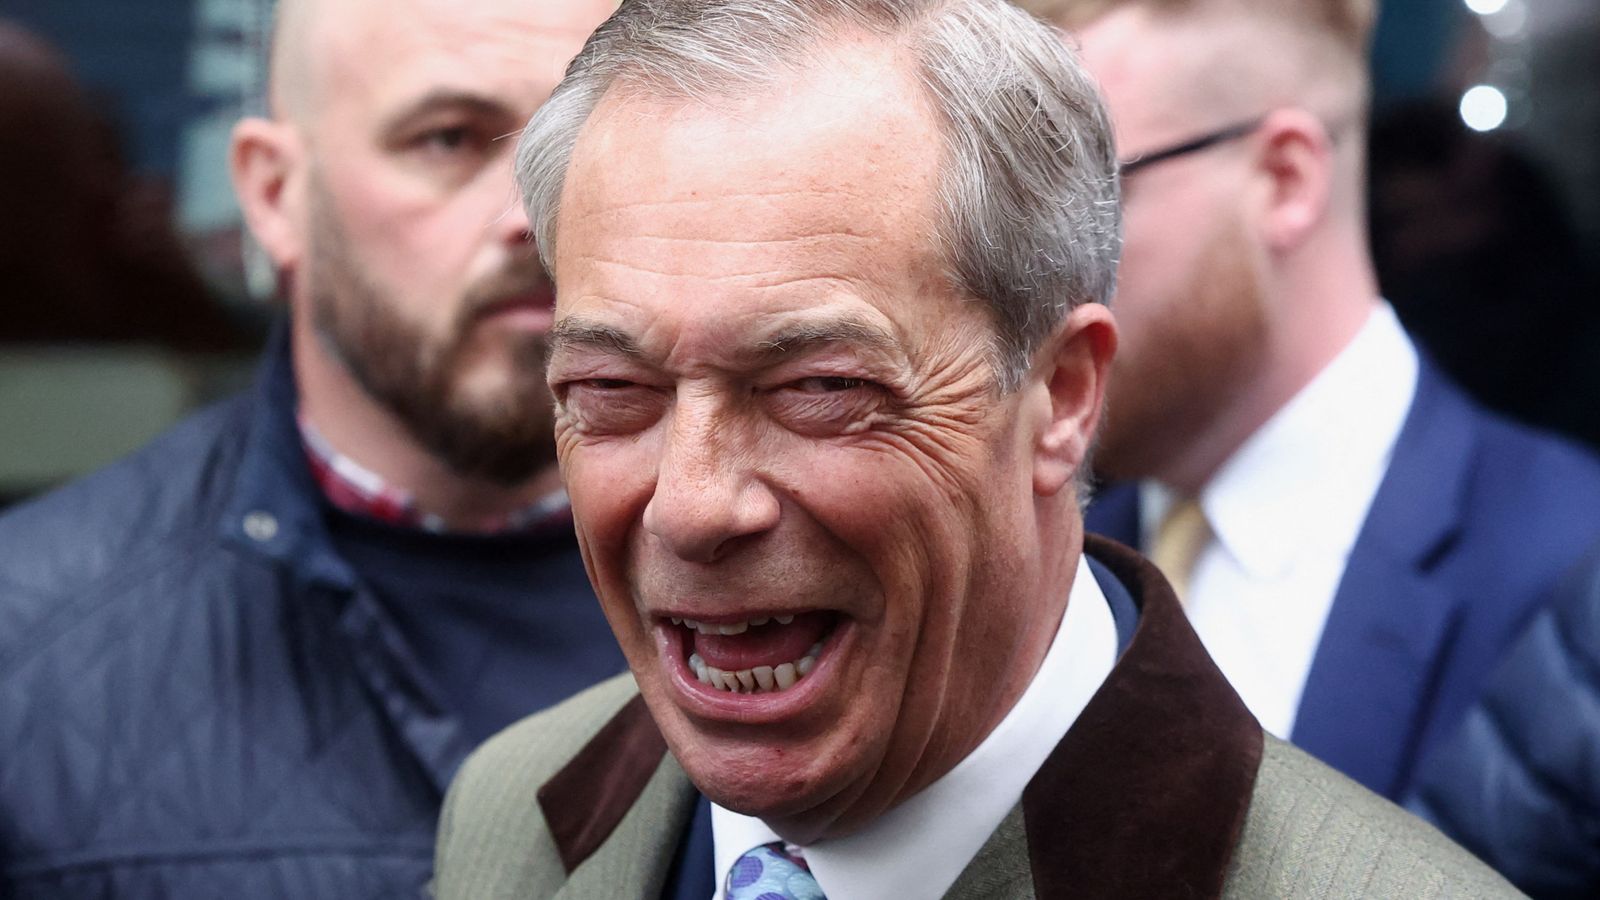 Nigel Farage won't stand in UK election so he can help US campaign